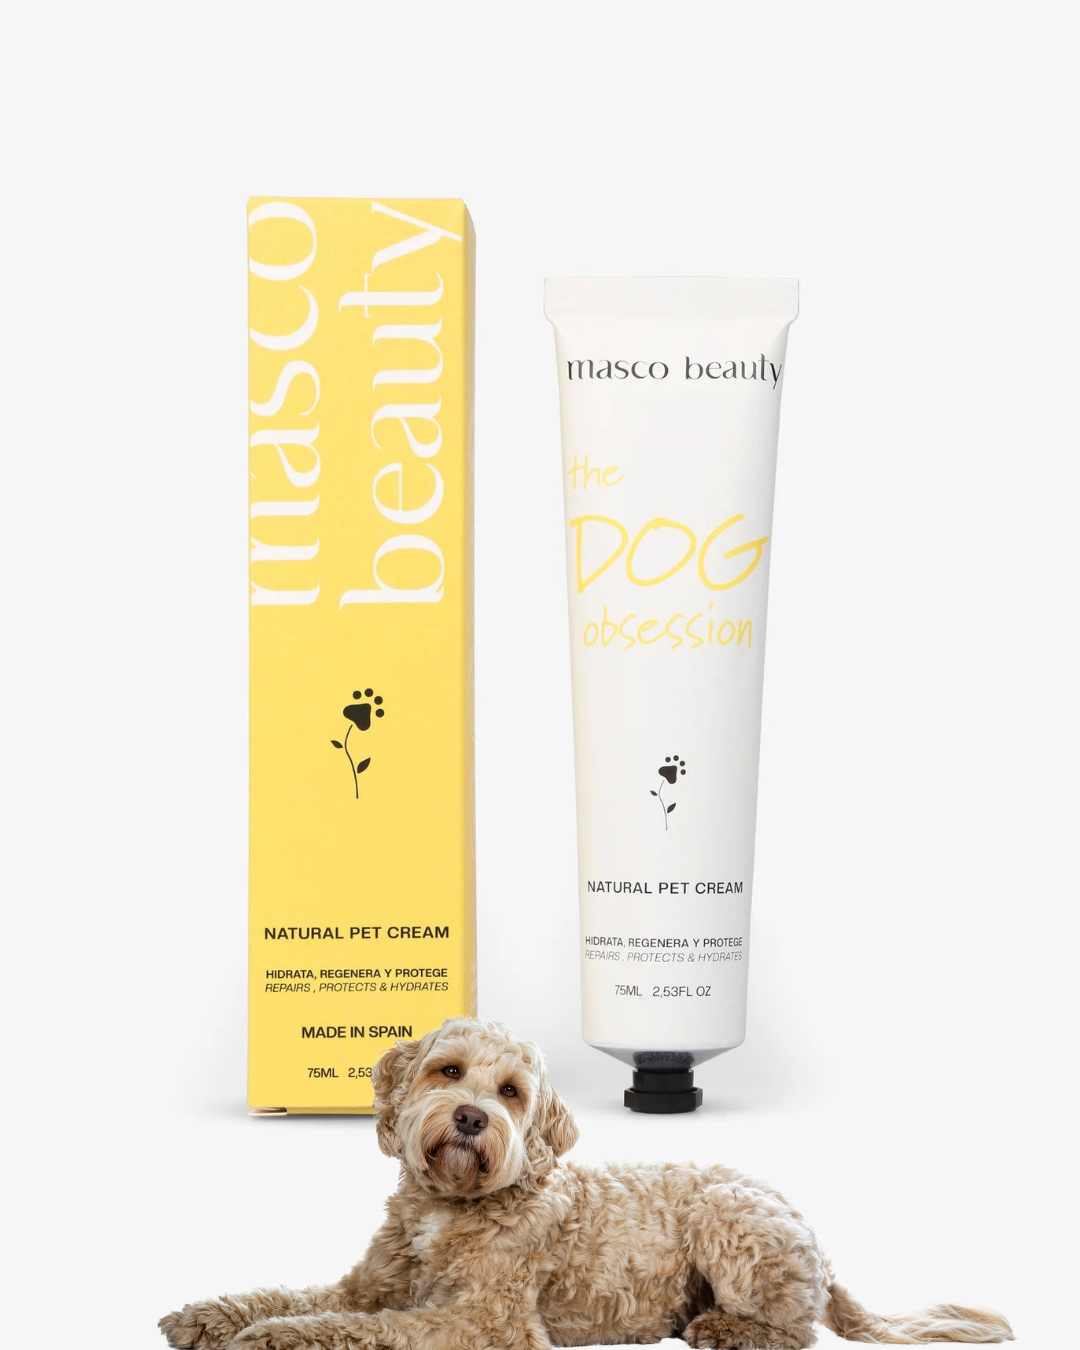 Natural Pet Cream "Dog Obsession"